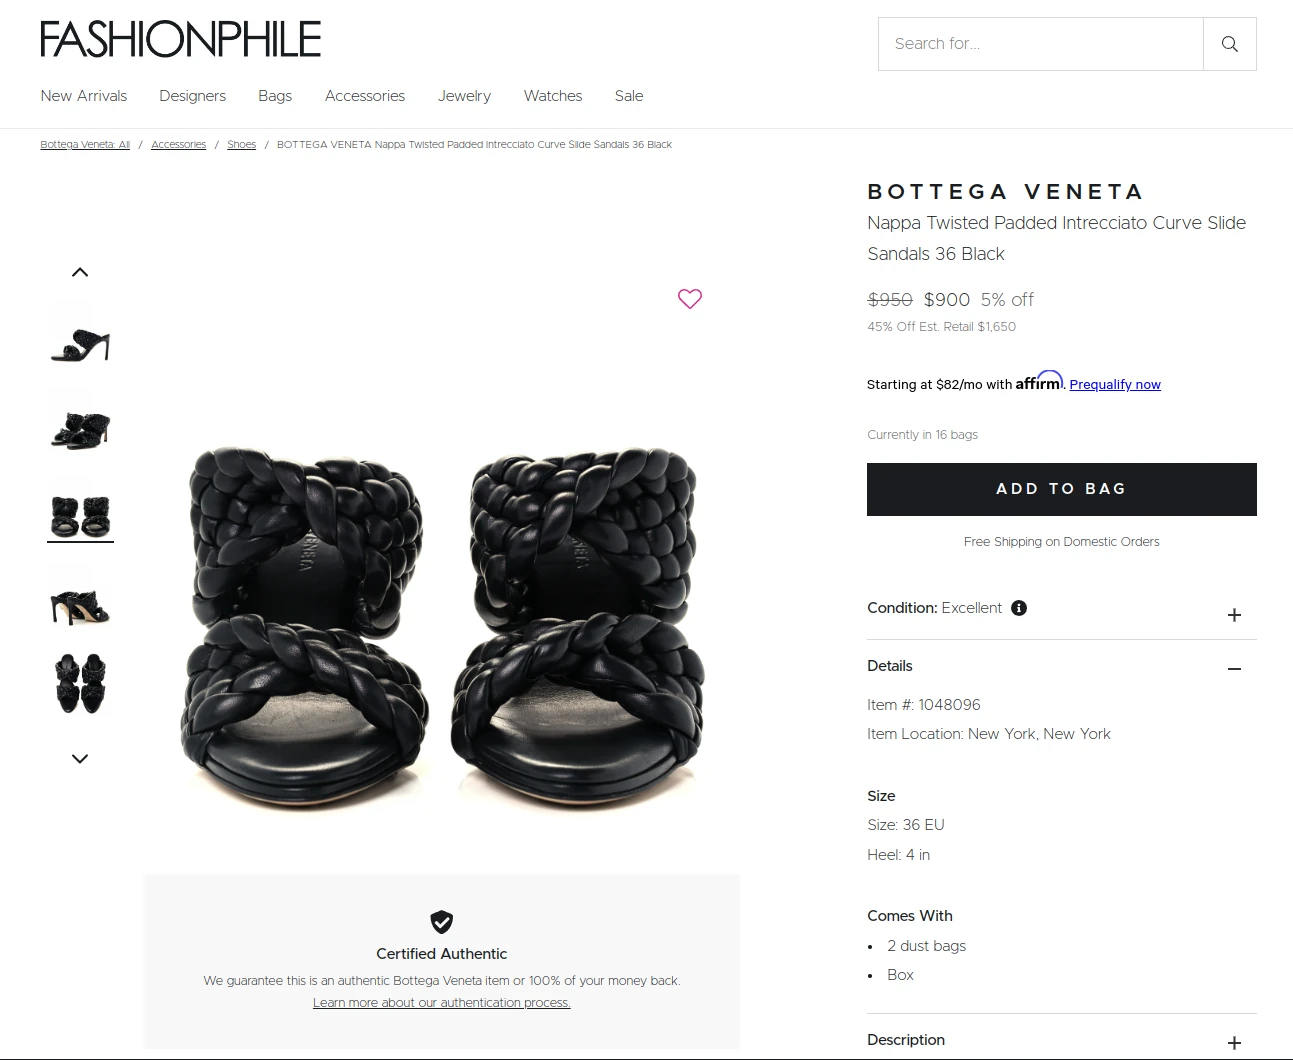 screen capture of fashionphile product page